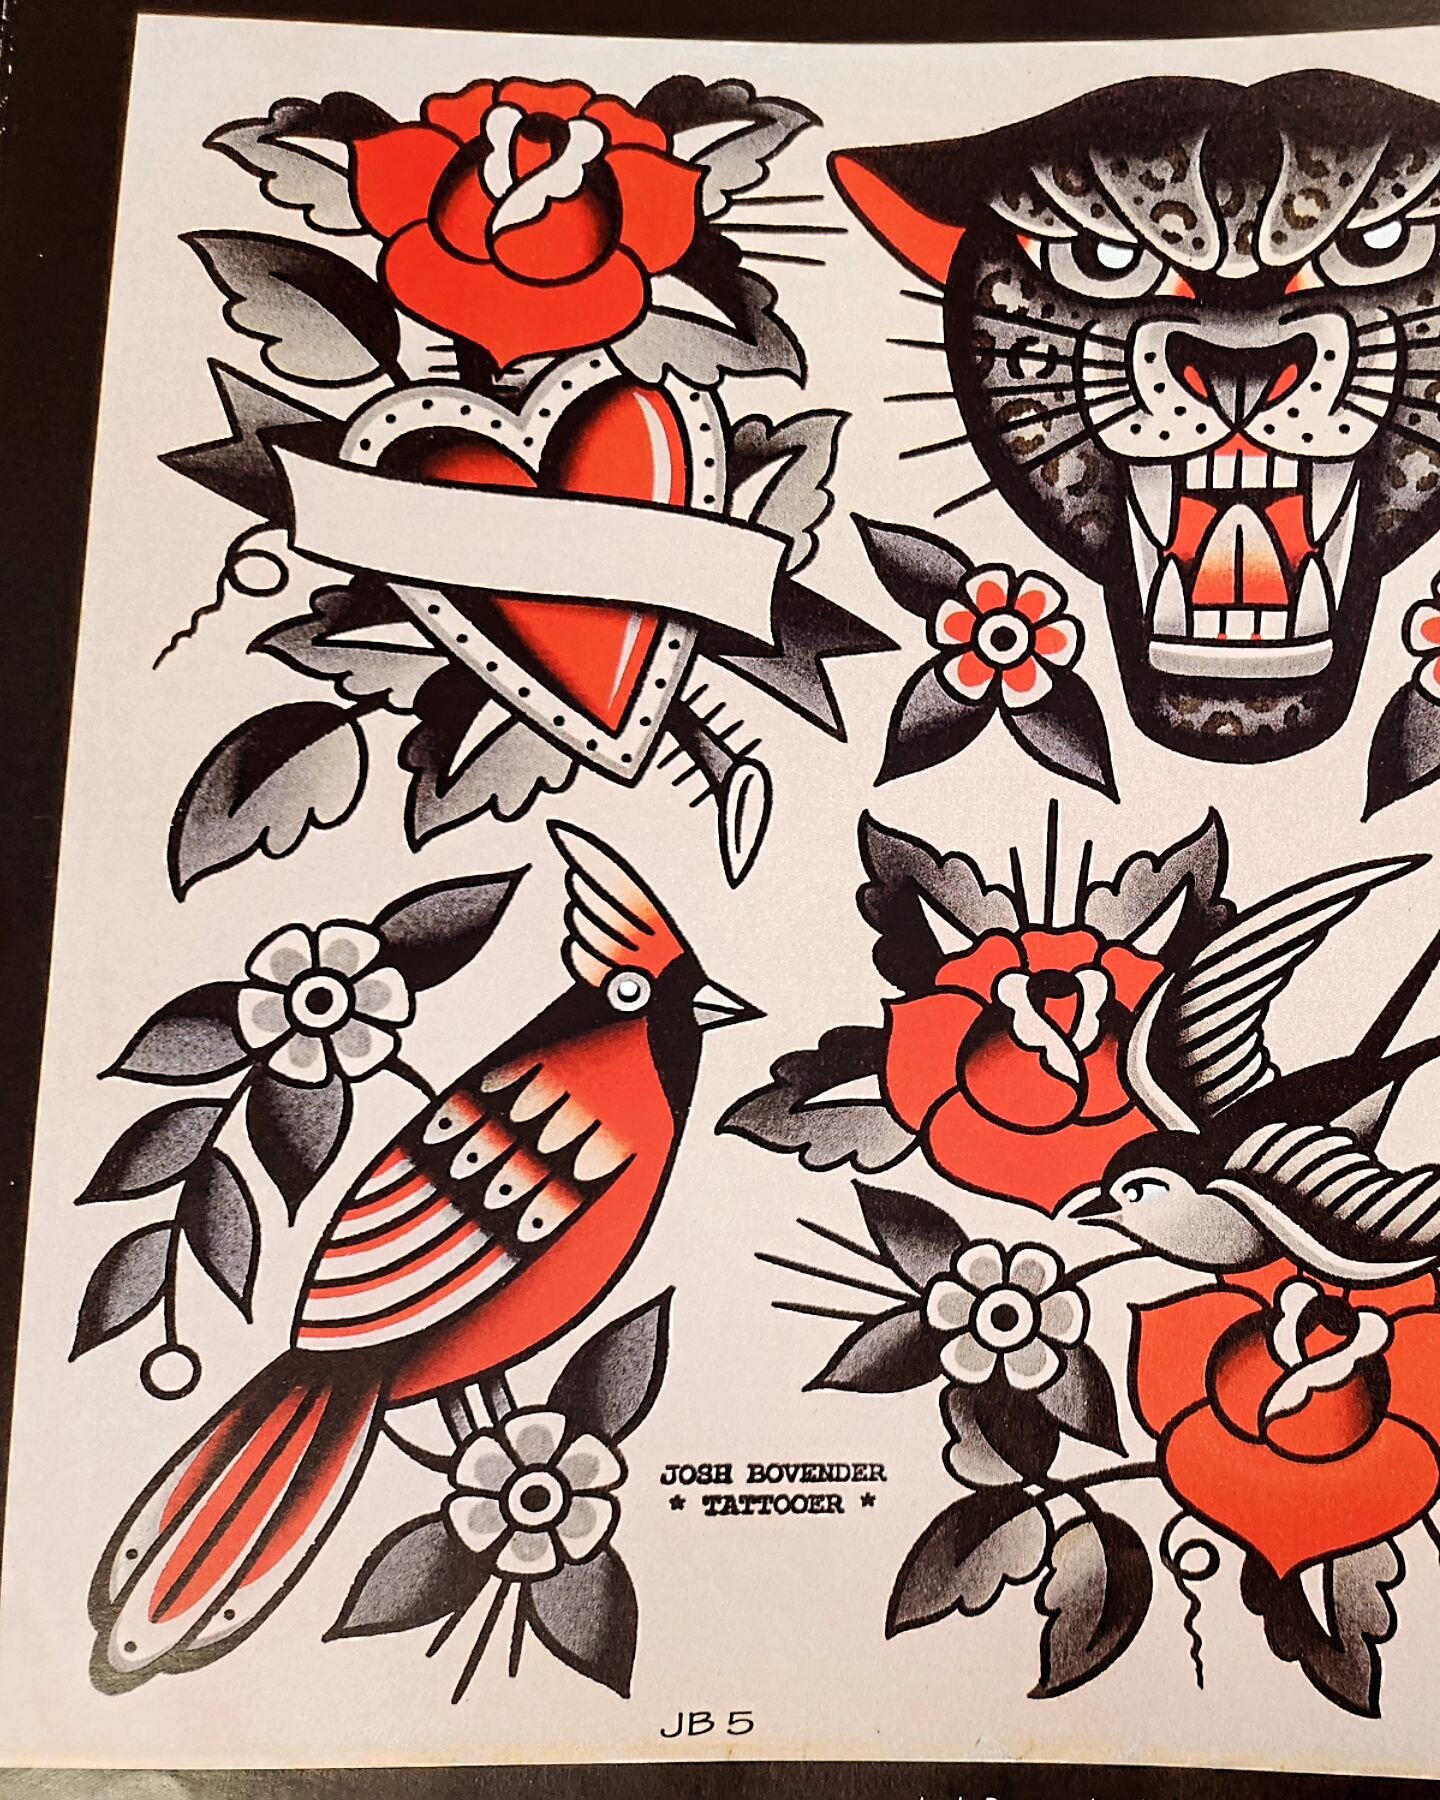 ❤️I'd love to do some of these Trad designs by Josh Bovender ! DM to book or questions!❤️
.
.
.
.
.
#flash #tattoo #flashtattoo #georgiatattooartist